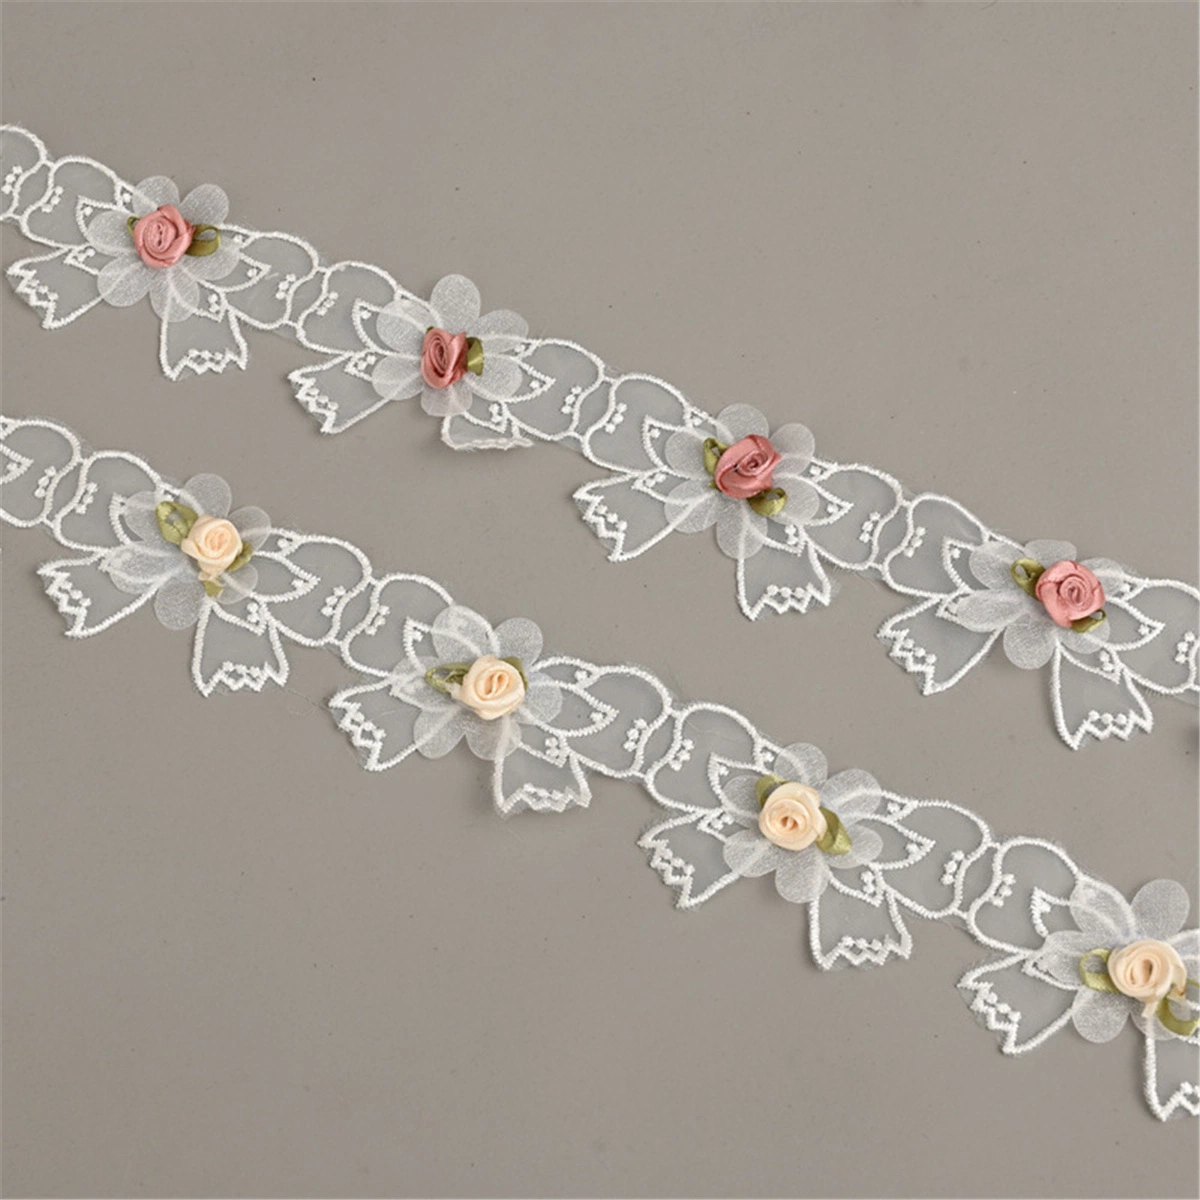 Clothing Lace Handmade Three-Dimensional Small Flower Edge Dress Children's Accessories Embroidery Nailed Beaded Lace Water-Soluble Lace